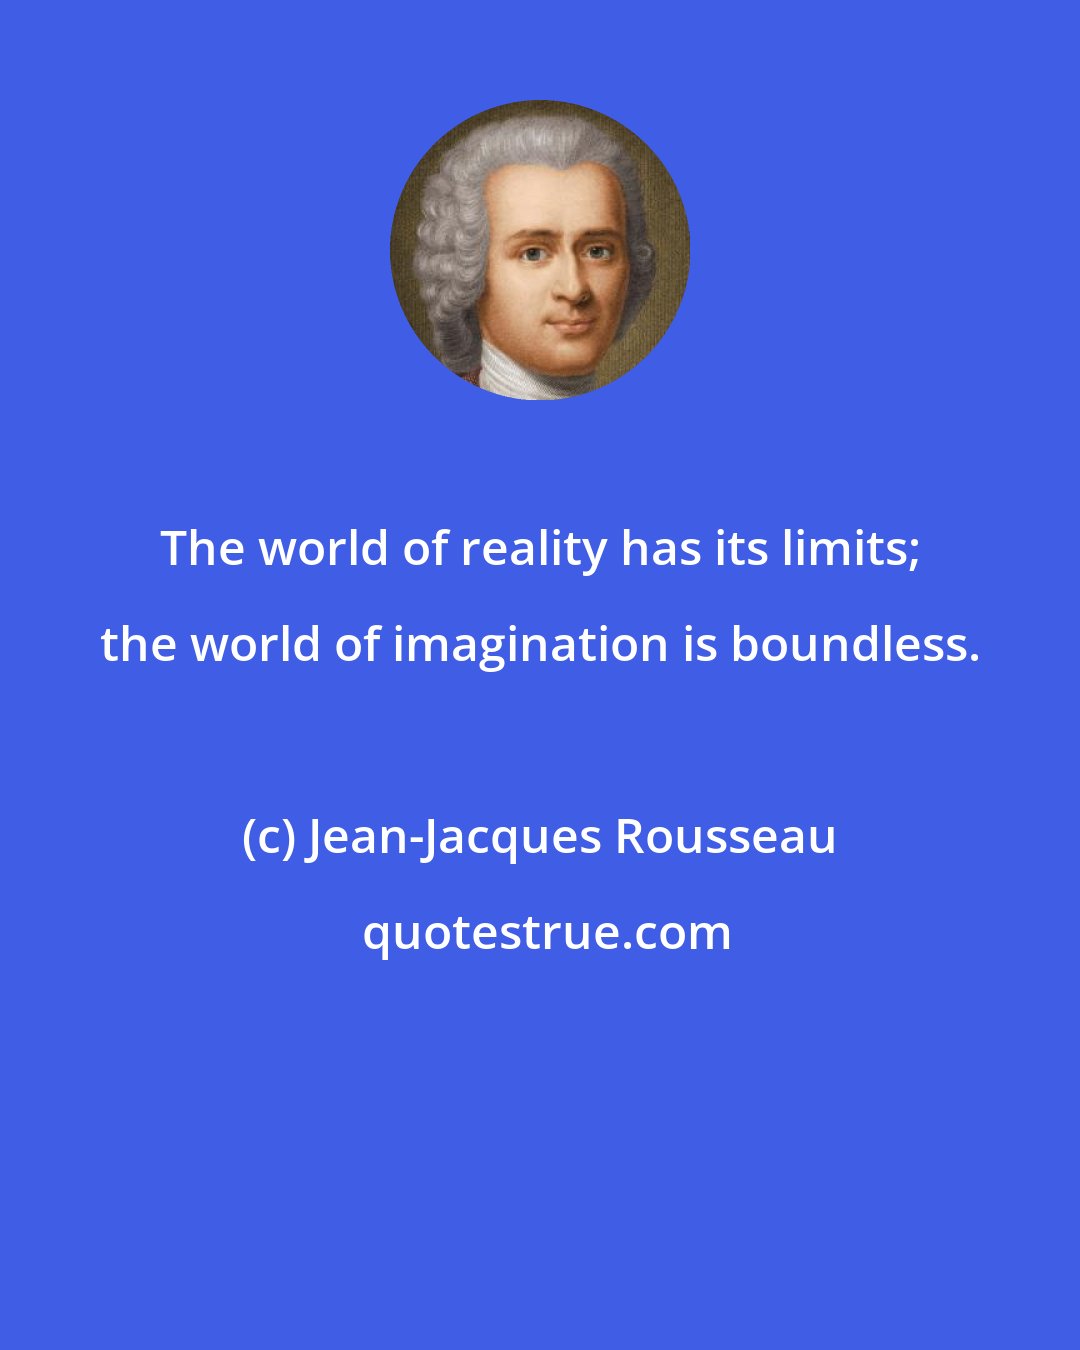 Jean-Jacques Rousseau: The world of reality has its limits; the world of imagination is boundless.